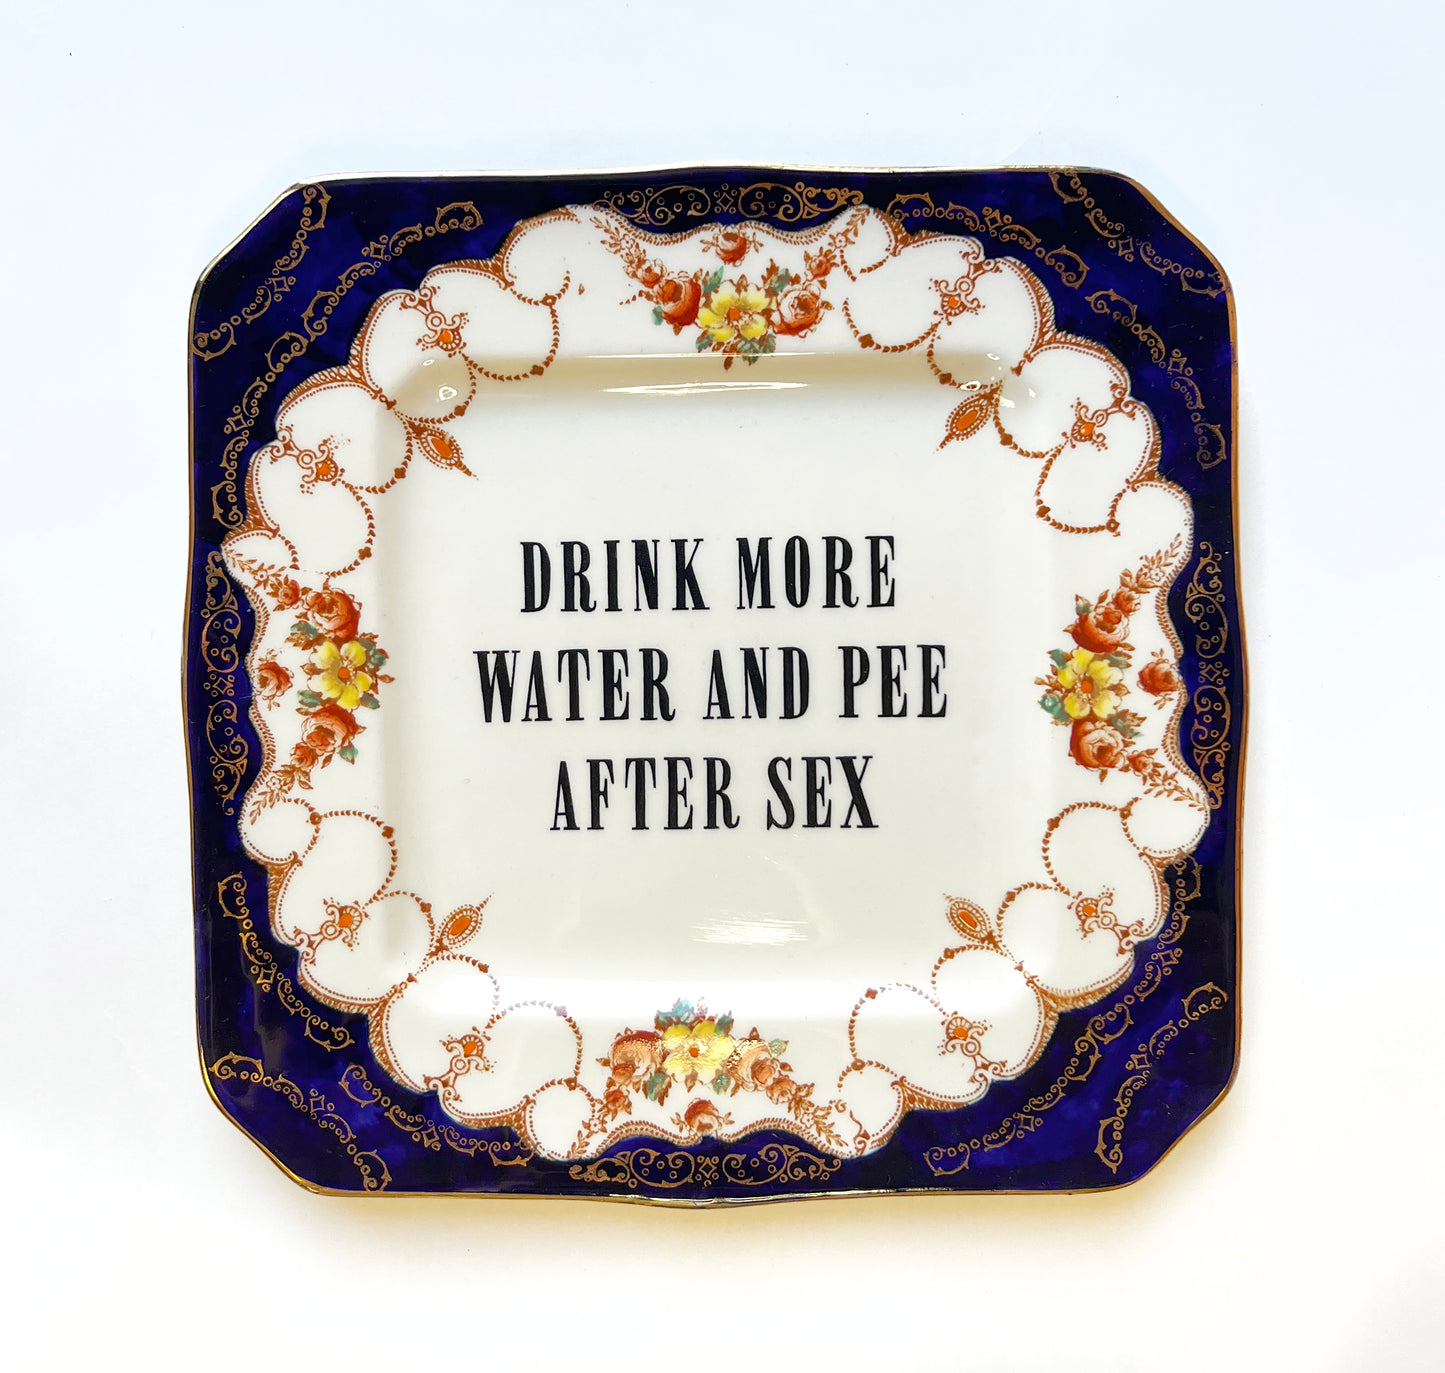  by Marie-Claude Marquis titled Marie-Claude Marquis - "Drink More Water And Pee After Sex"